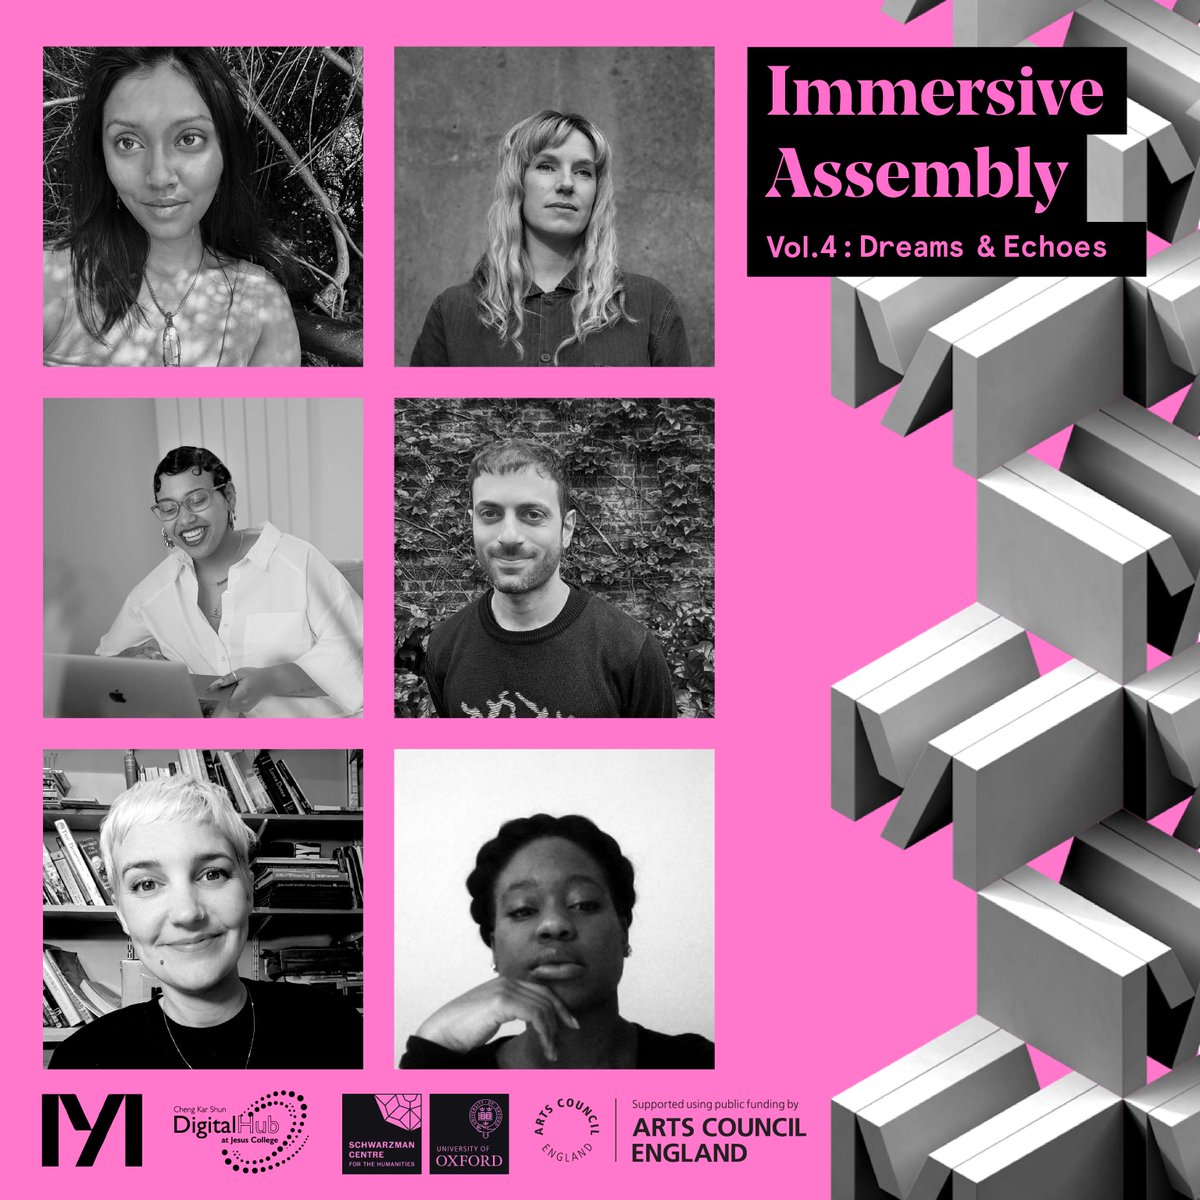 The #ChengKarShunDigitalHub is excited to announce a new partnership with @mediale_uk & @oxfculturalprog for Immersive Assembly - Mediale's early career digital artists & creators development programme - and the cohort of participating artists for Vol 4 👇 ow.ly/oBZe50RuBP2